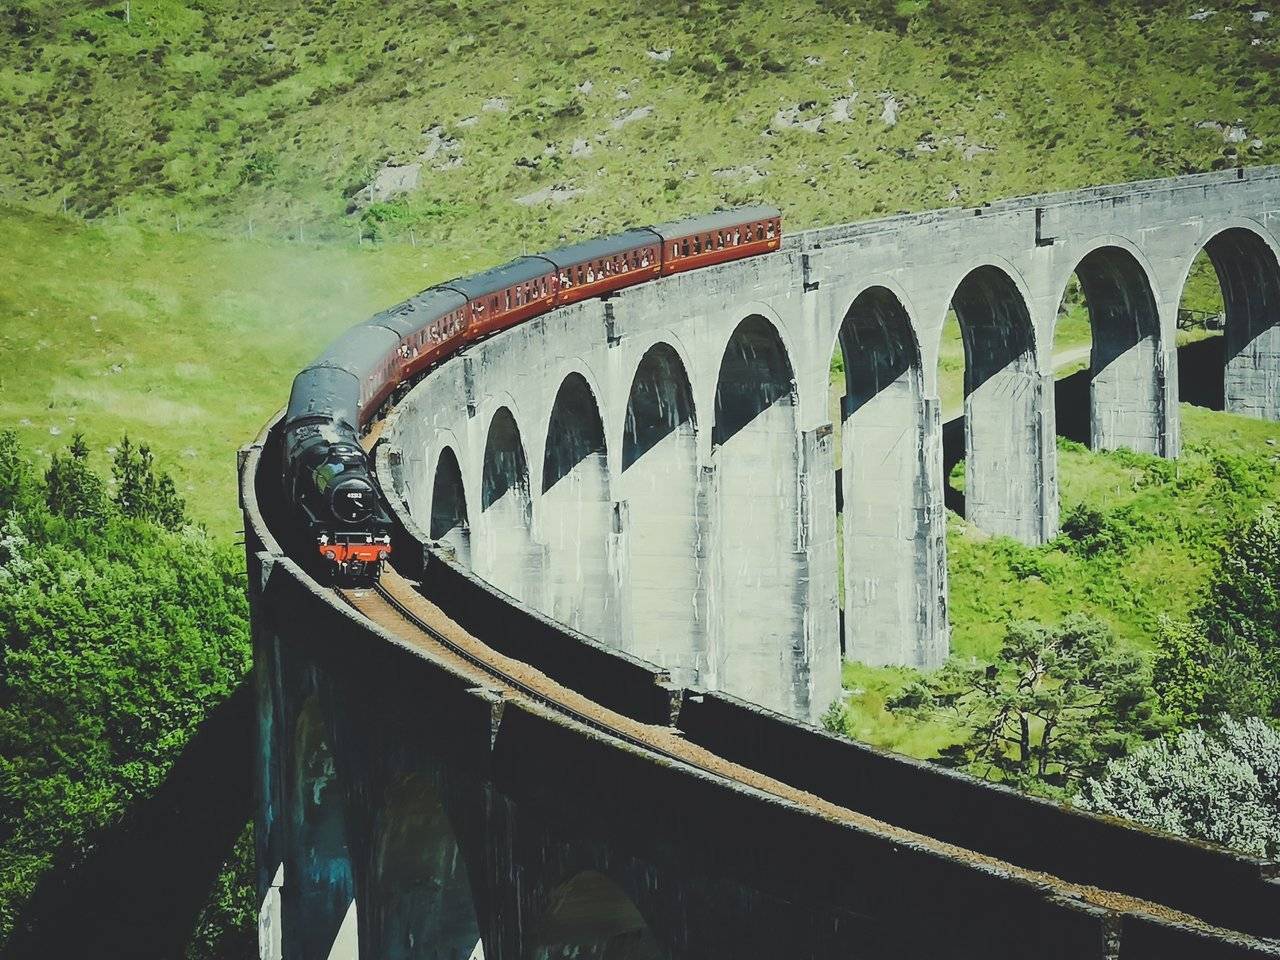   The actual Harry POtter train “The Jacobite” doesn’t spit out as much of a steam as it does in the movie. Photo by Alis Monte [CC BY-SA 4.0], via Connecting the Dots